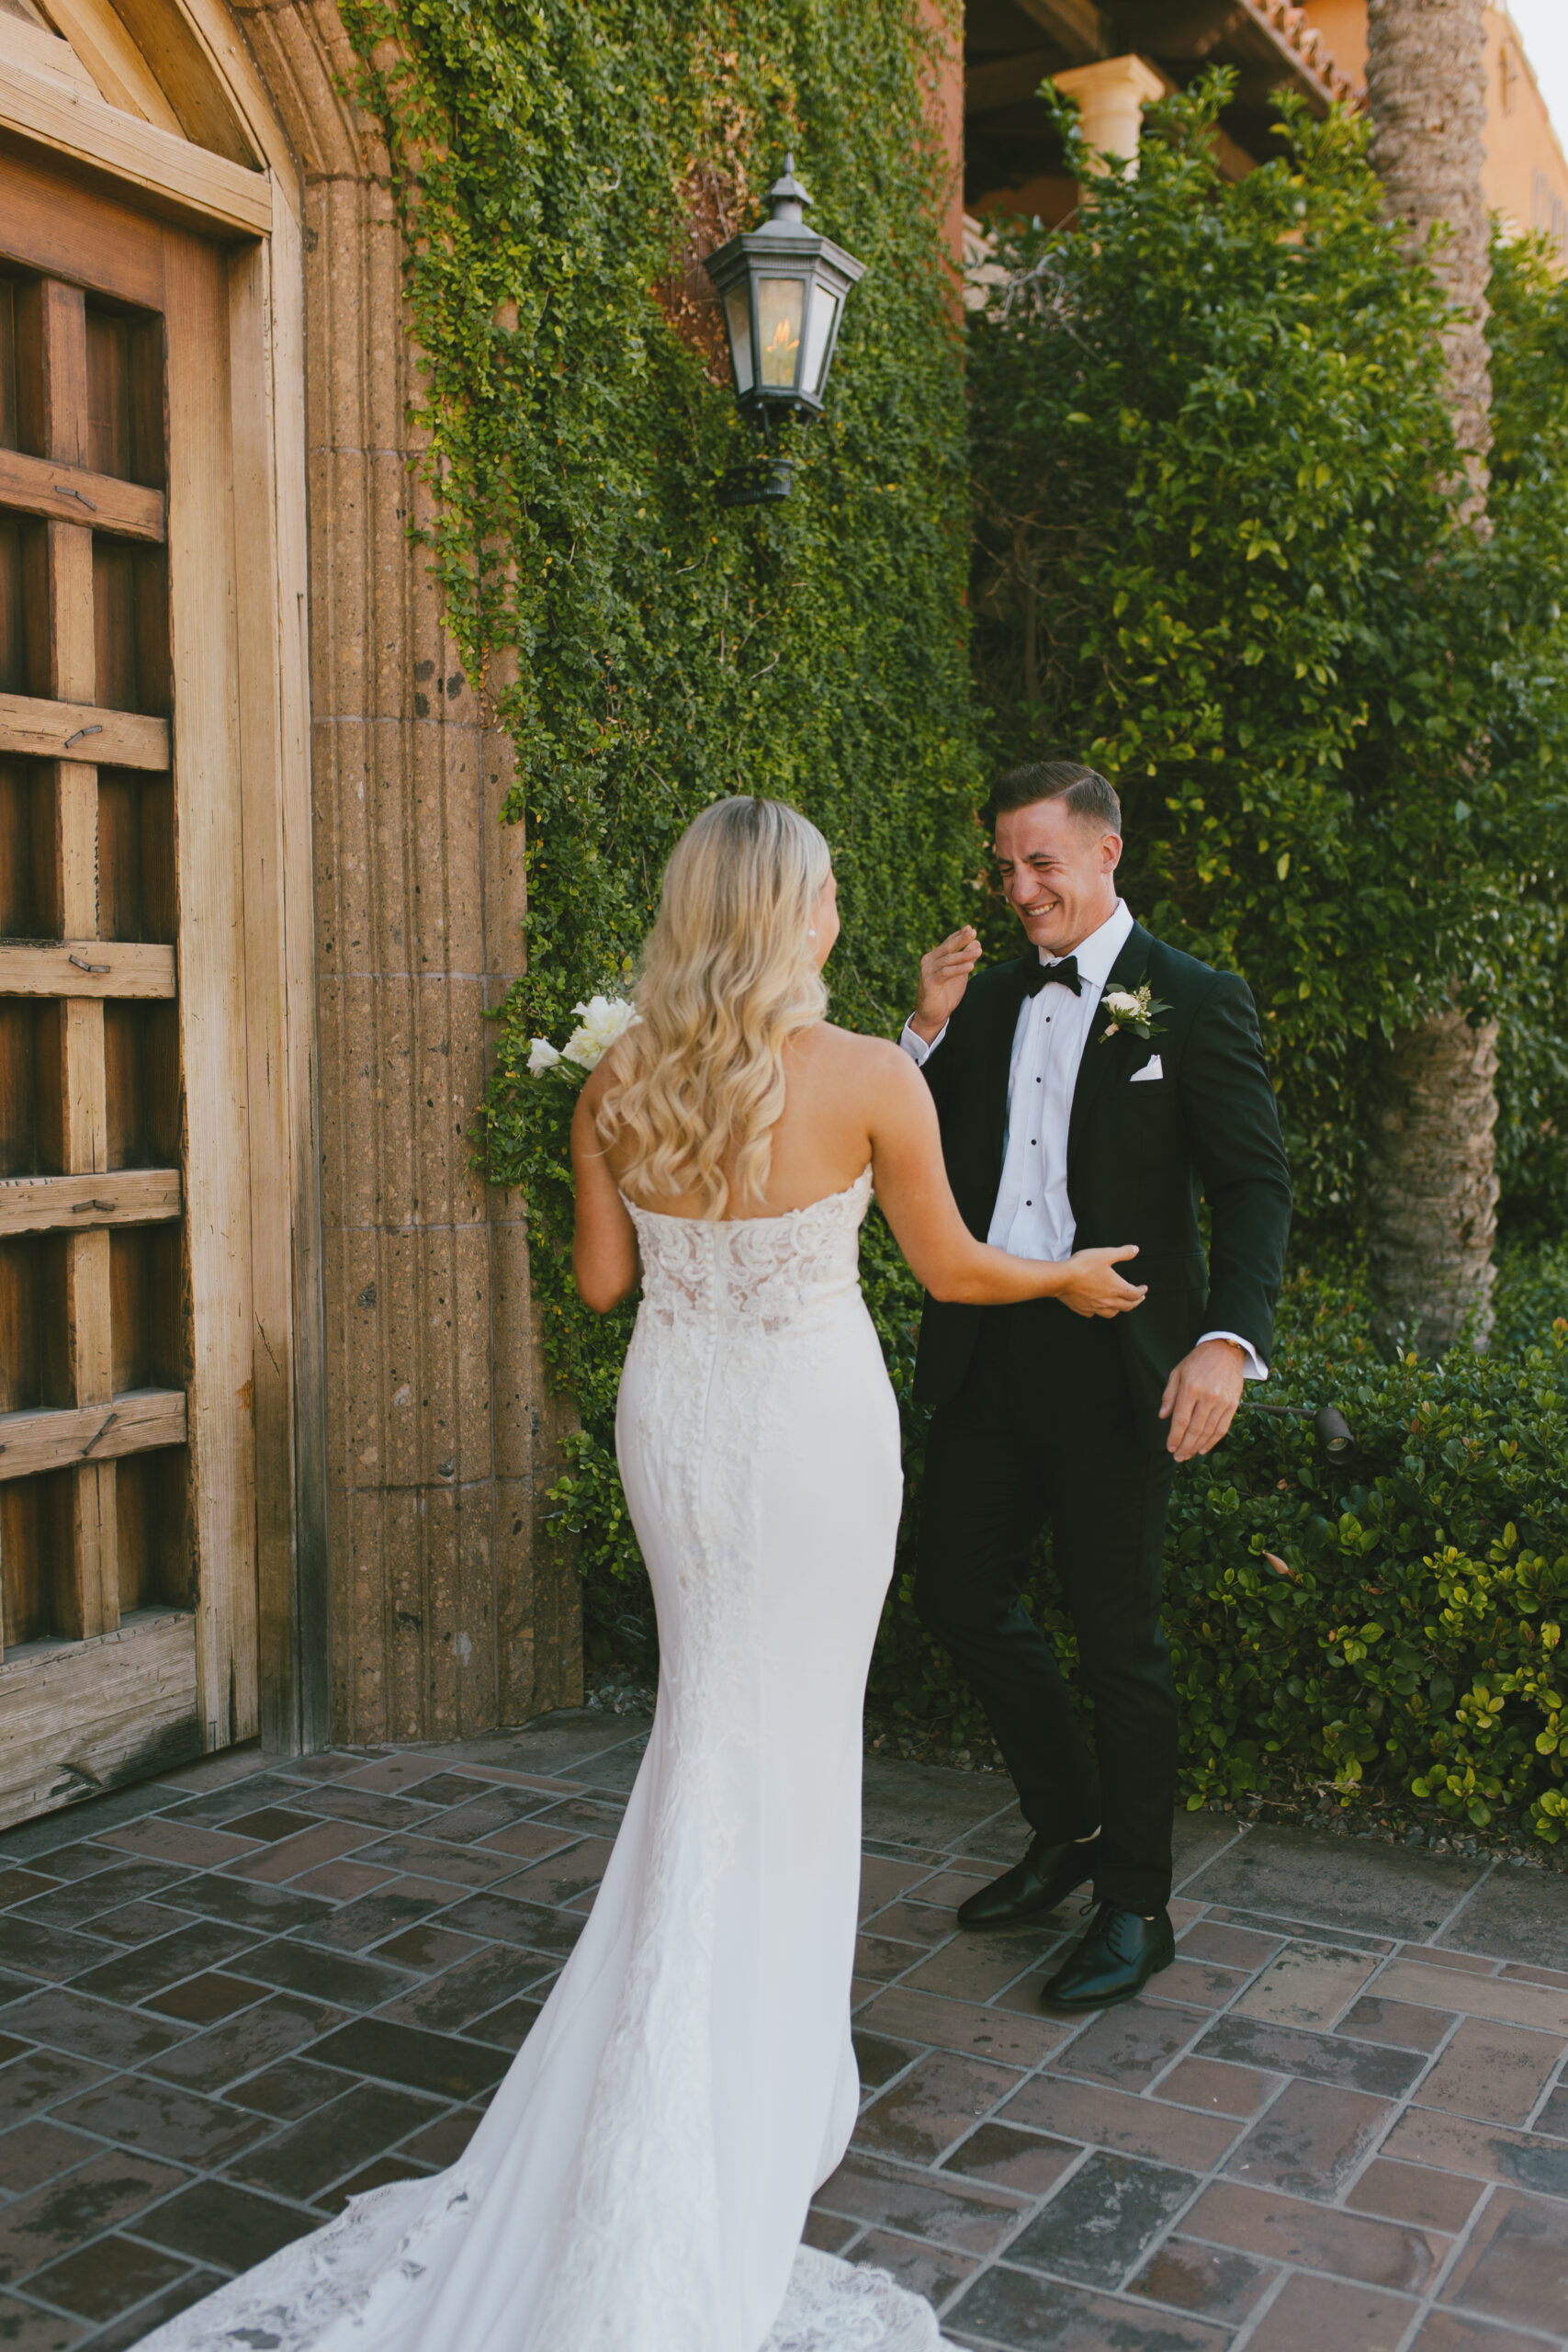 Matt and Alexa Bride and Groom emotional first look with Romantic wedding photography in Phoenix